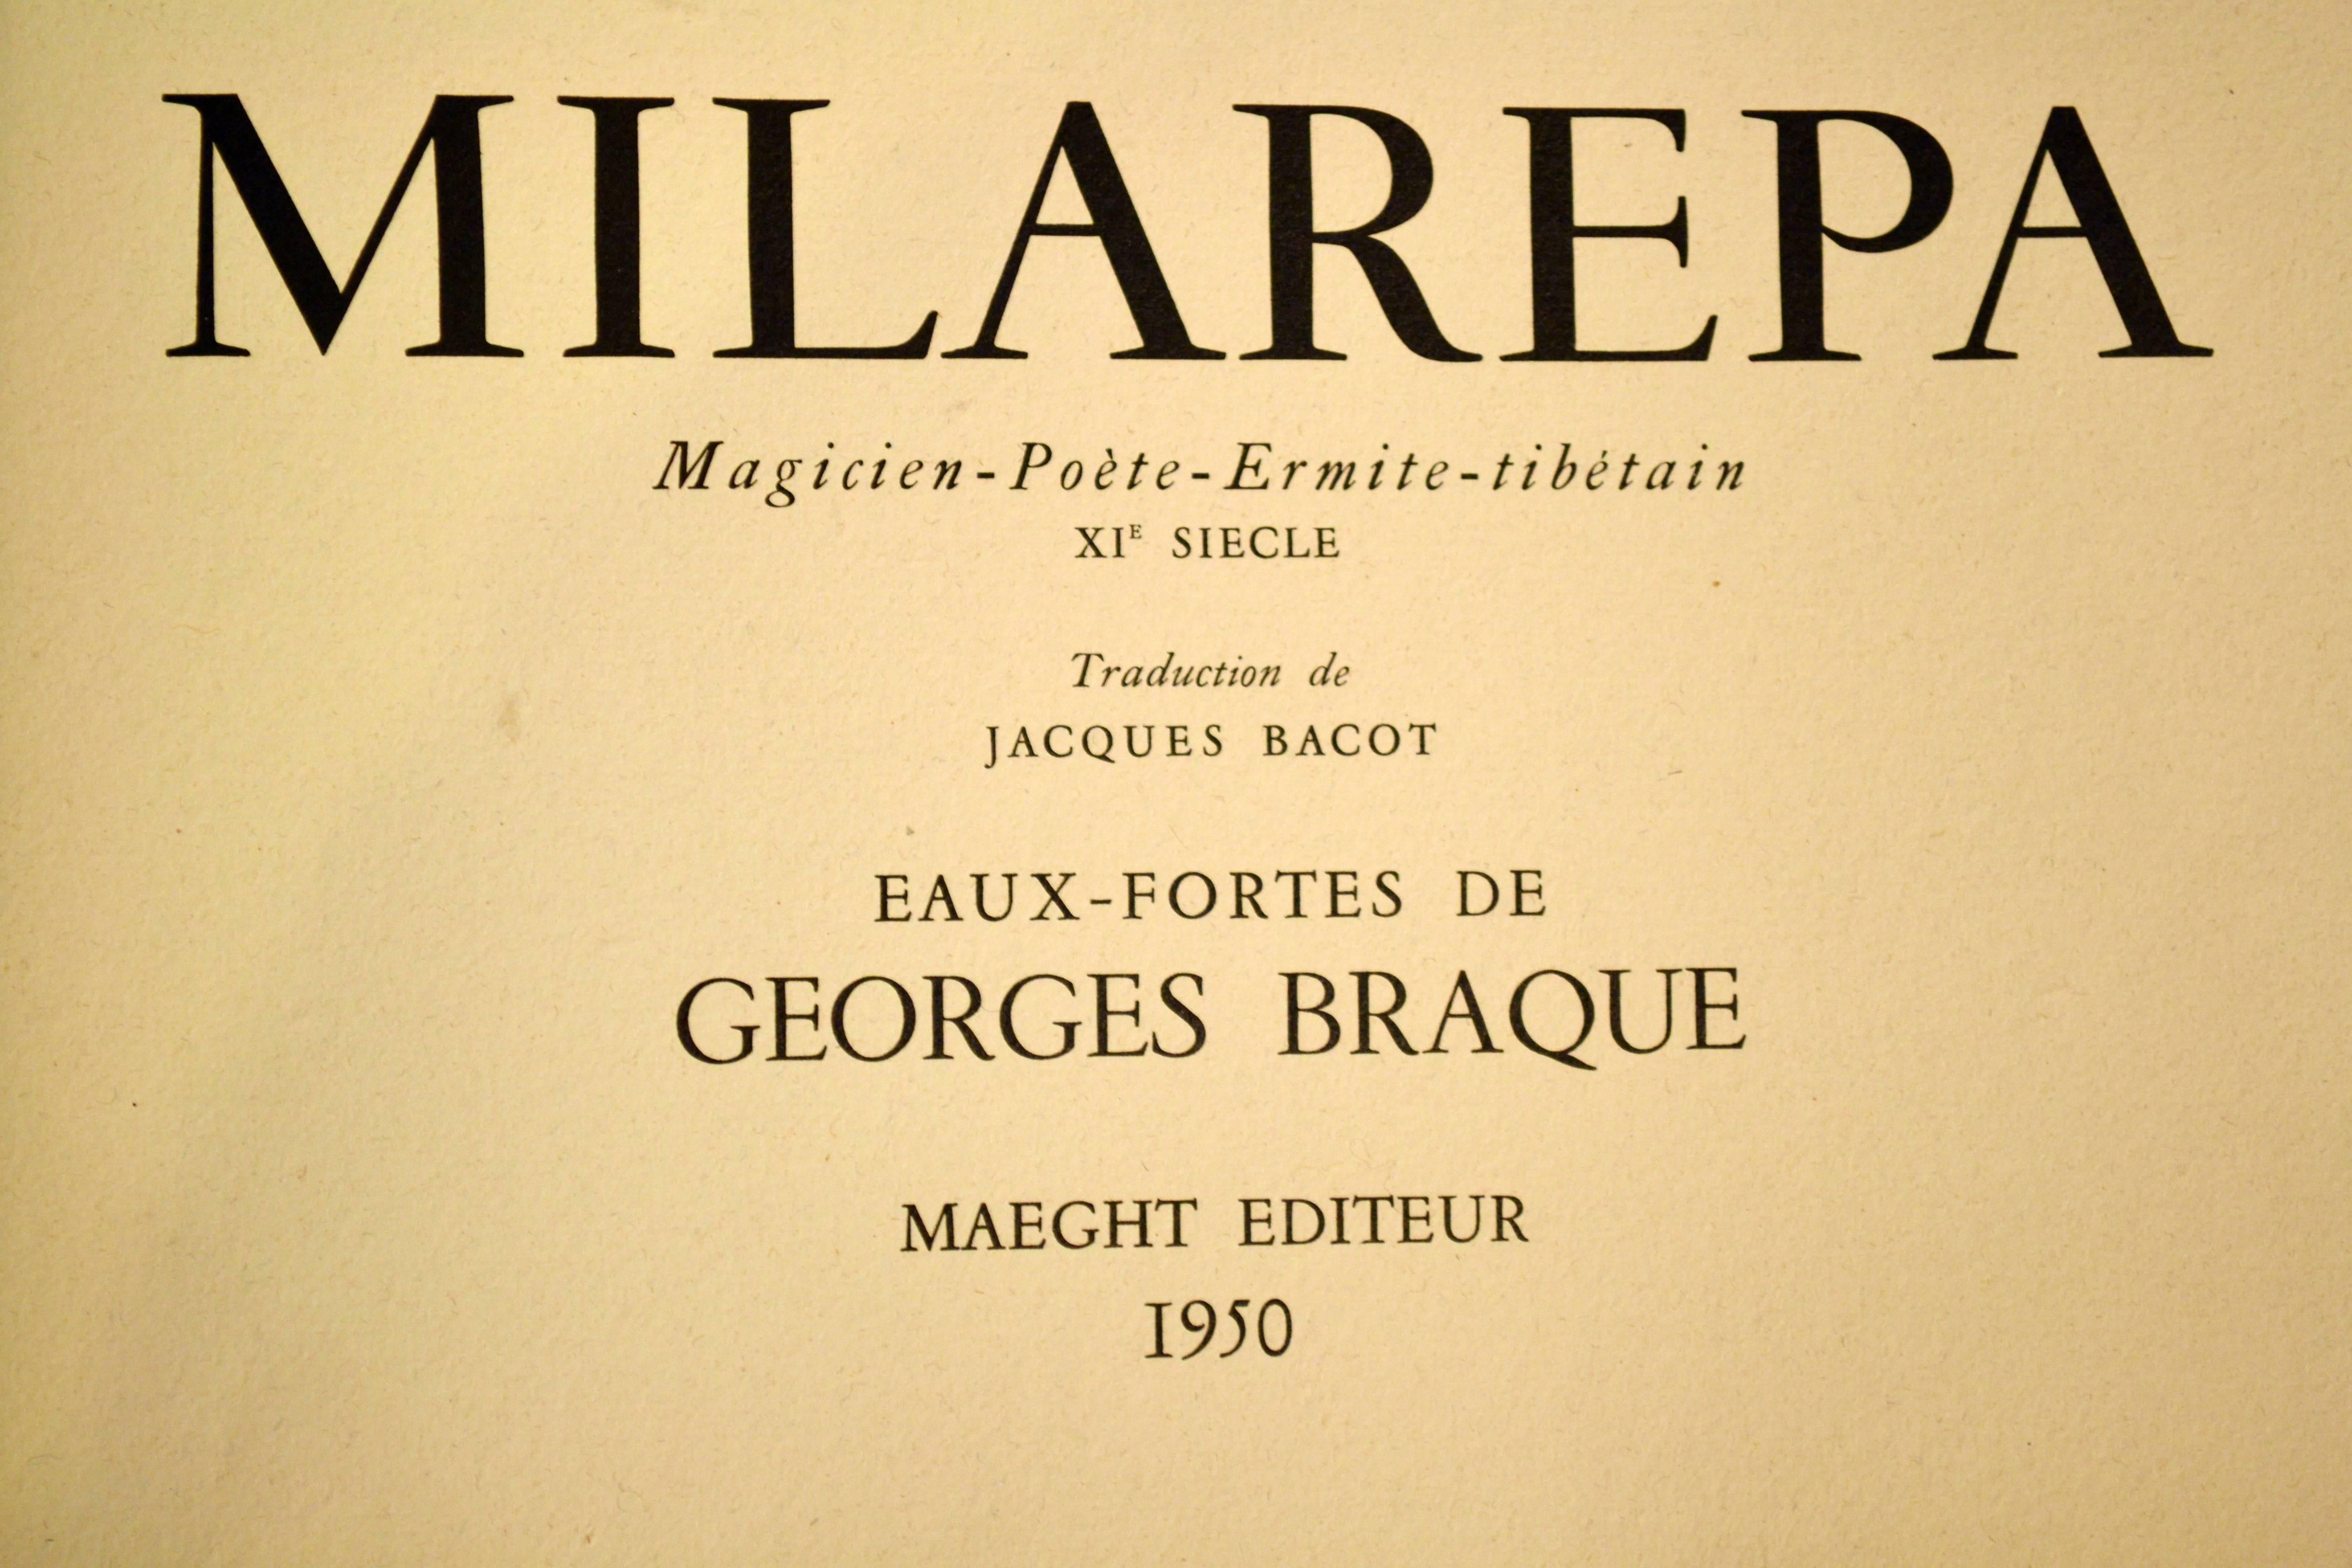 Georges Braque Abstract Print - Milarepa